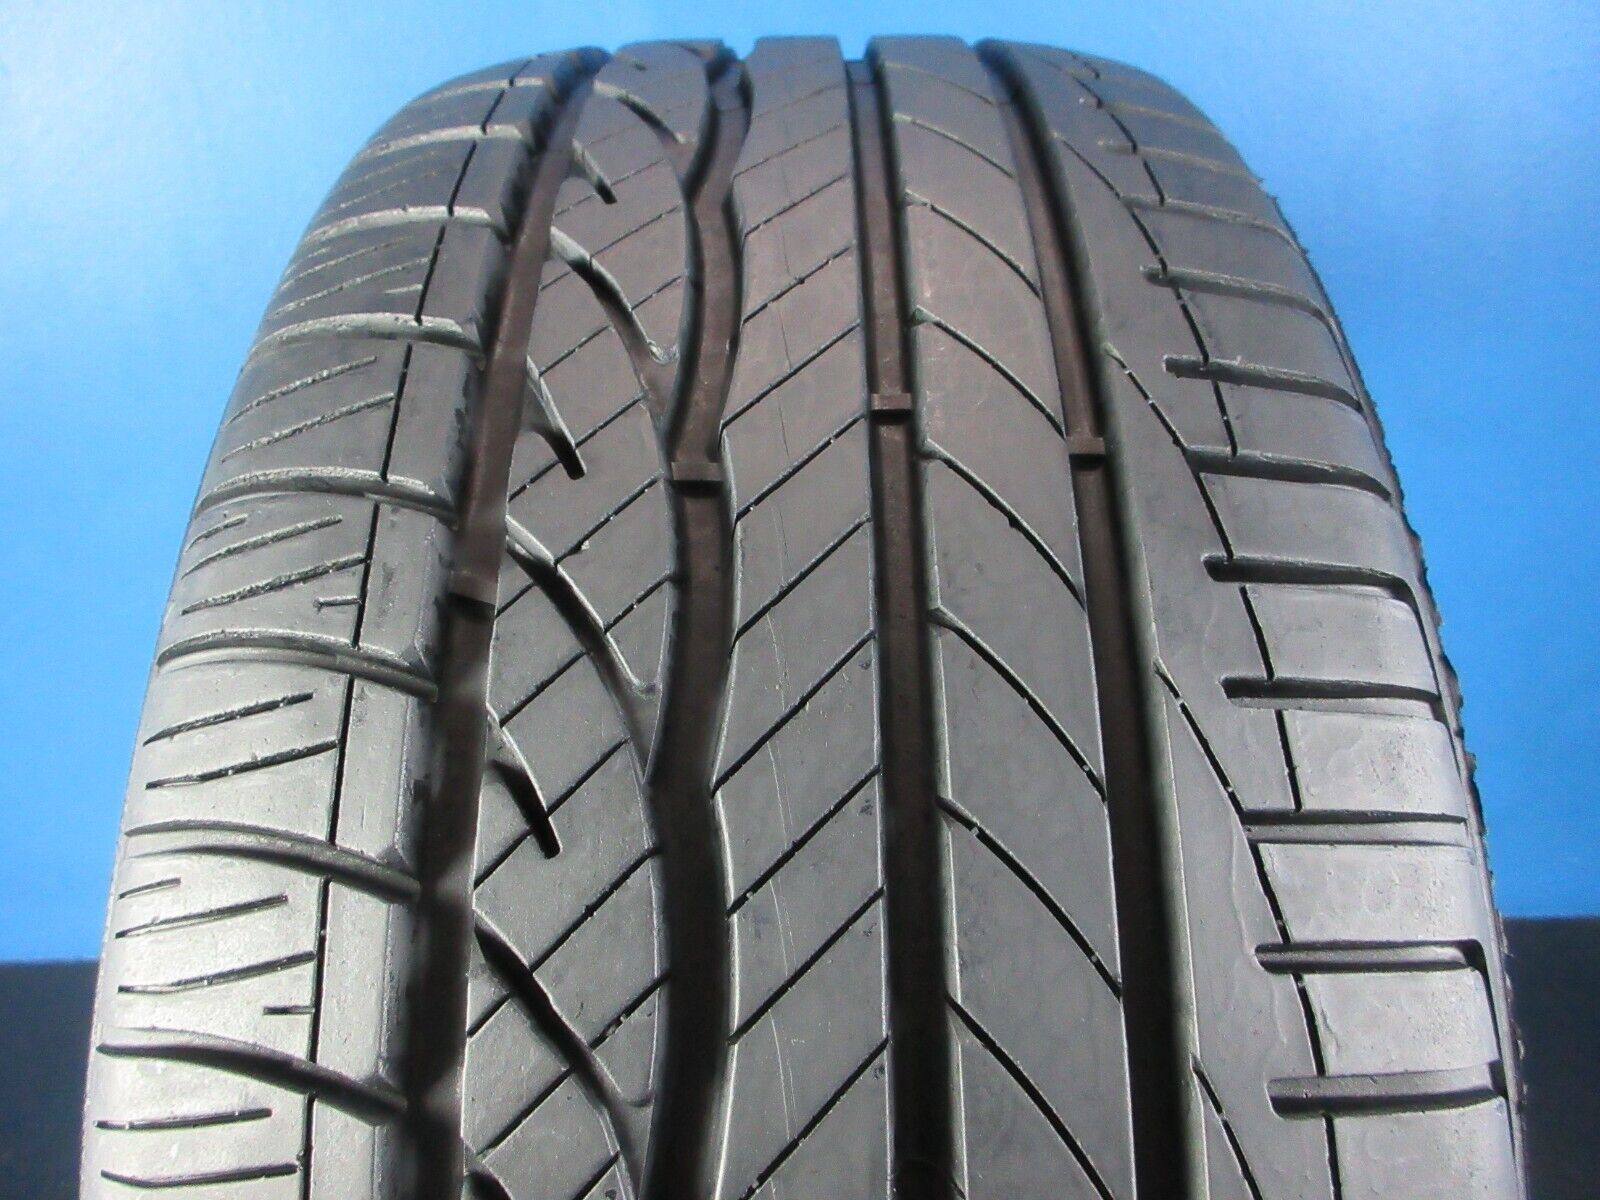 Used  Dunlop Conquest Touring     225 40 18   10/32 High Tread  No Patch 2373/2D